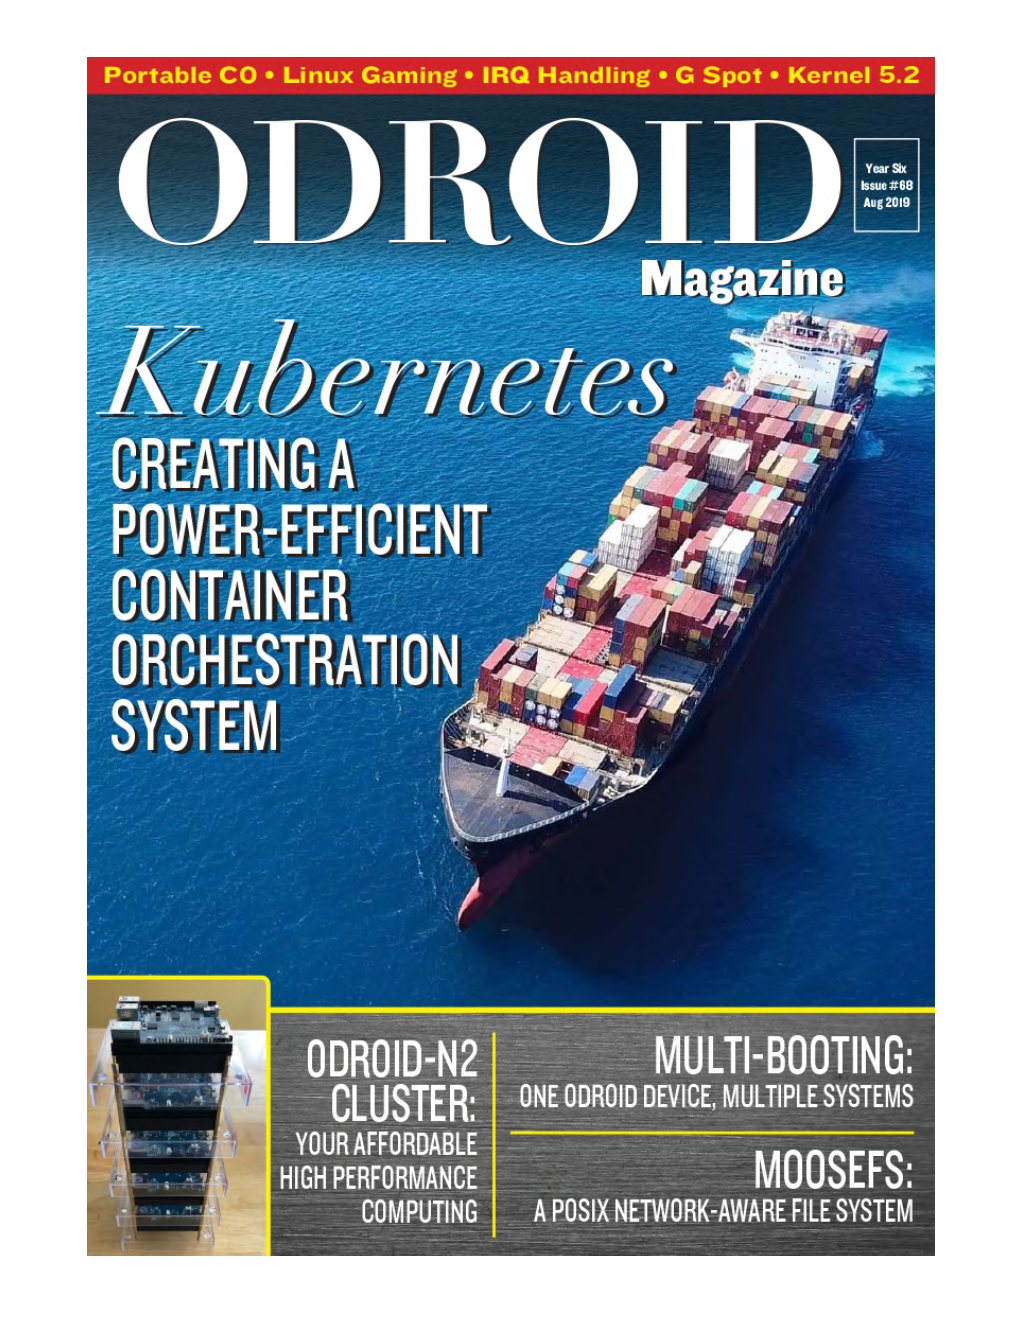 Running Kubernetes on the ODROID-N2: Create a Power-E�Cient Container Orchestration System  August 6, 2019